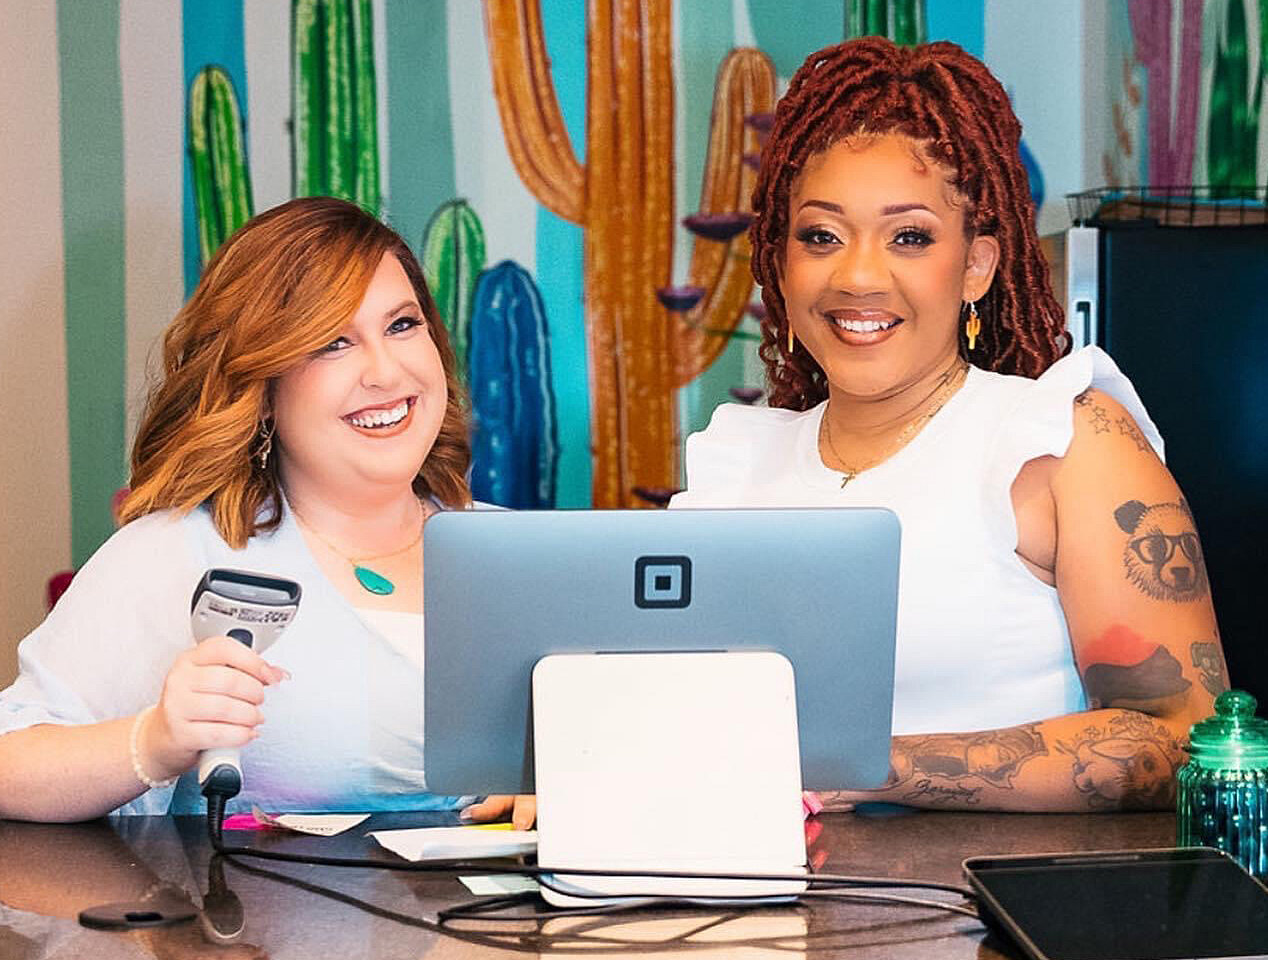 Retail Therapy AZ co-owners Erica Jerido and Jacqueline Thomas are opening a downtown Phoenix storefront.